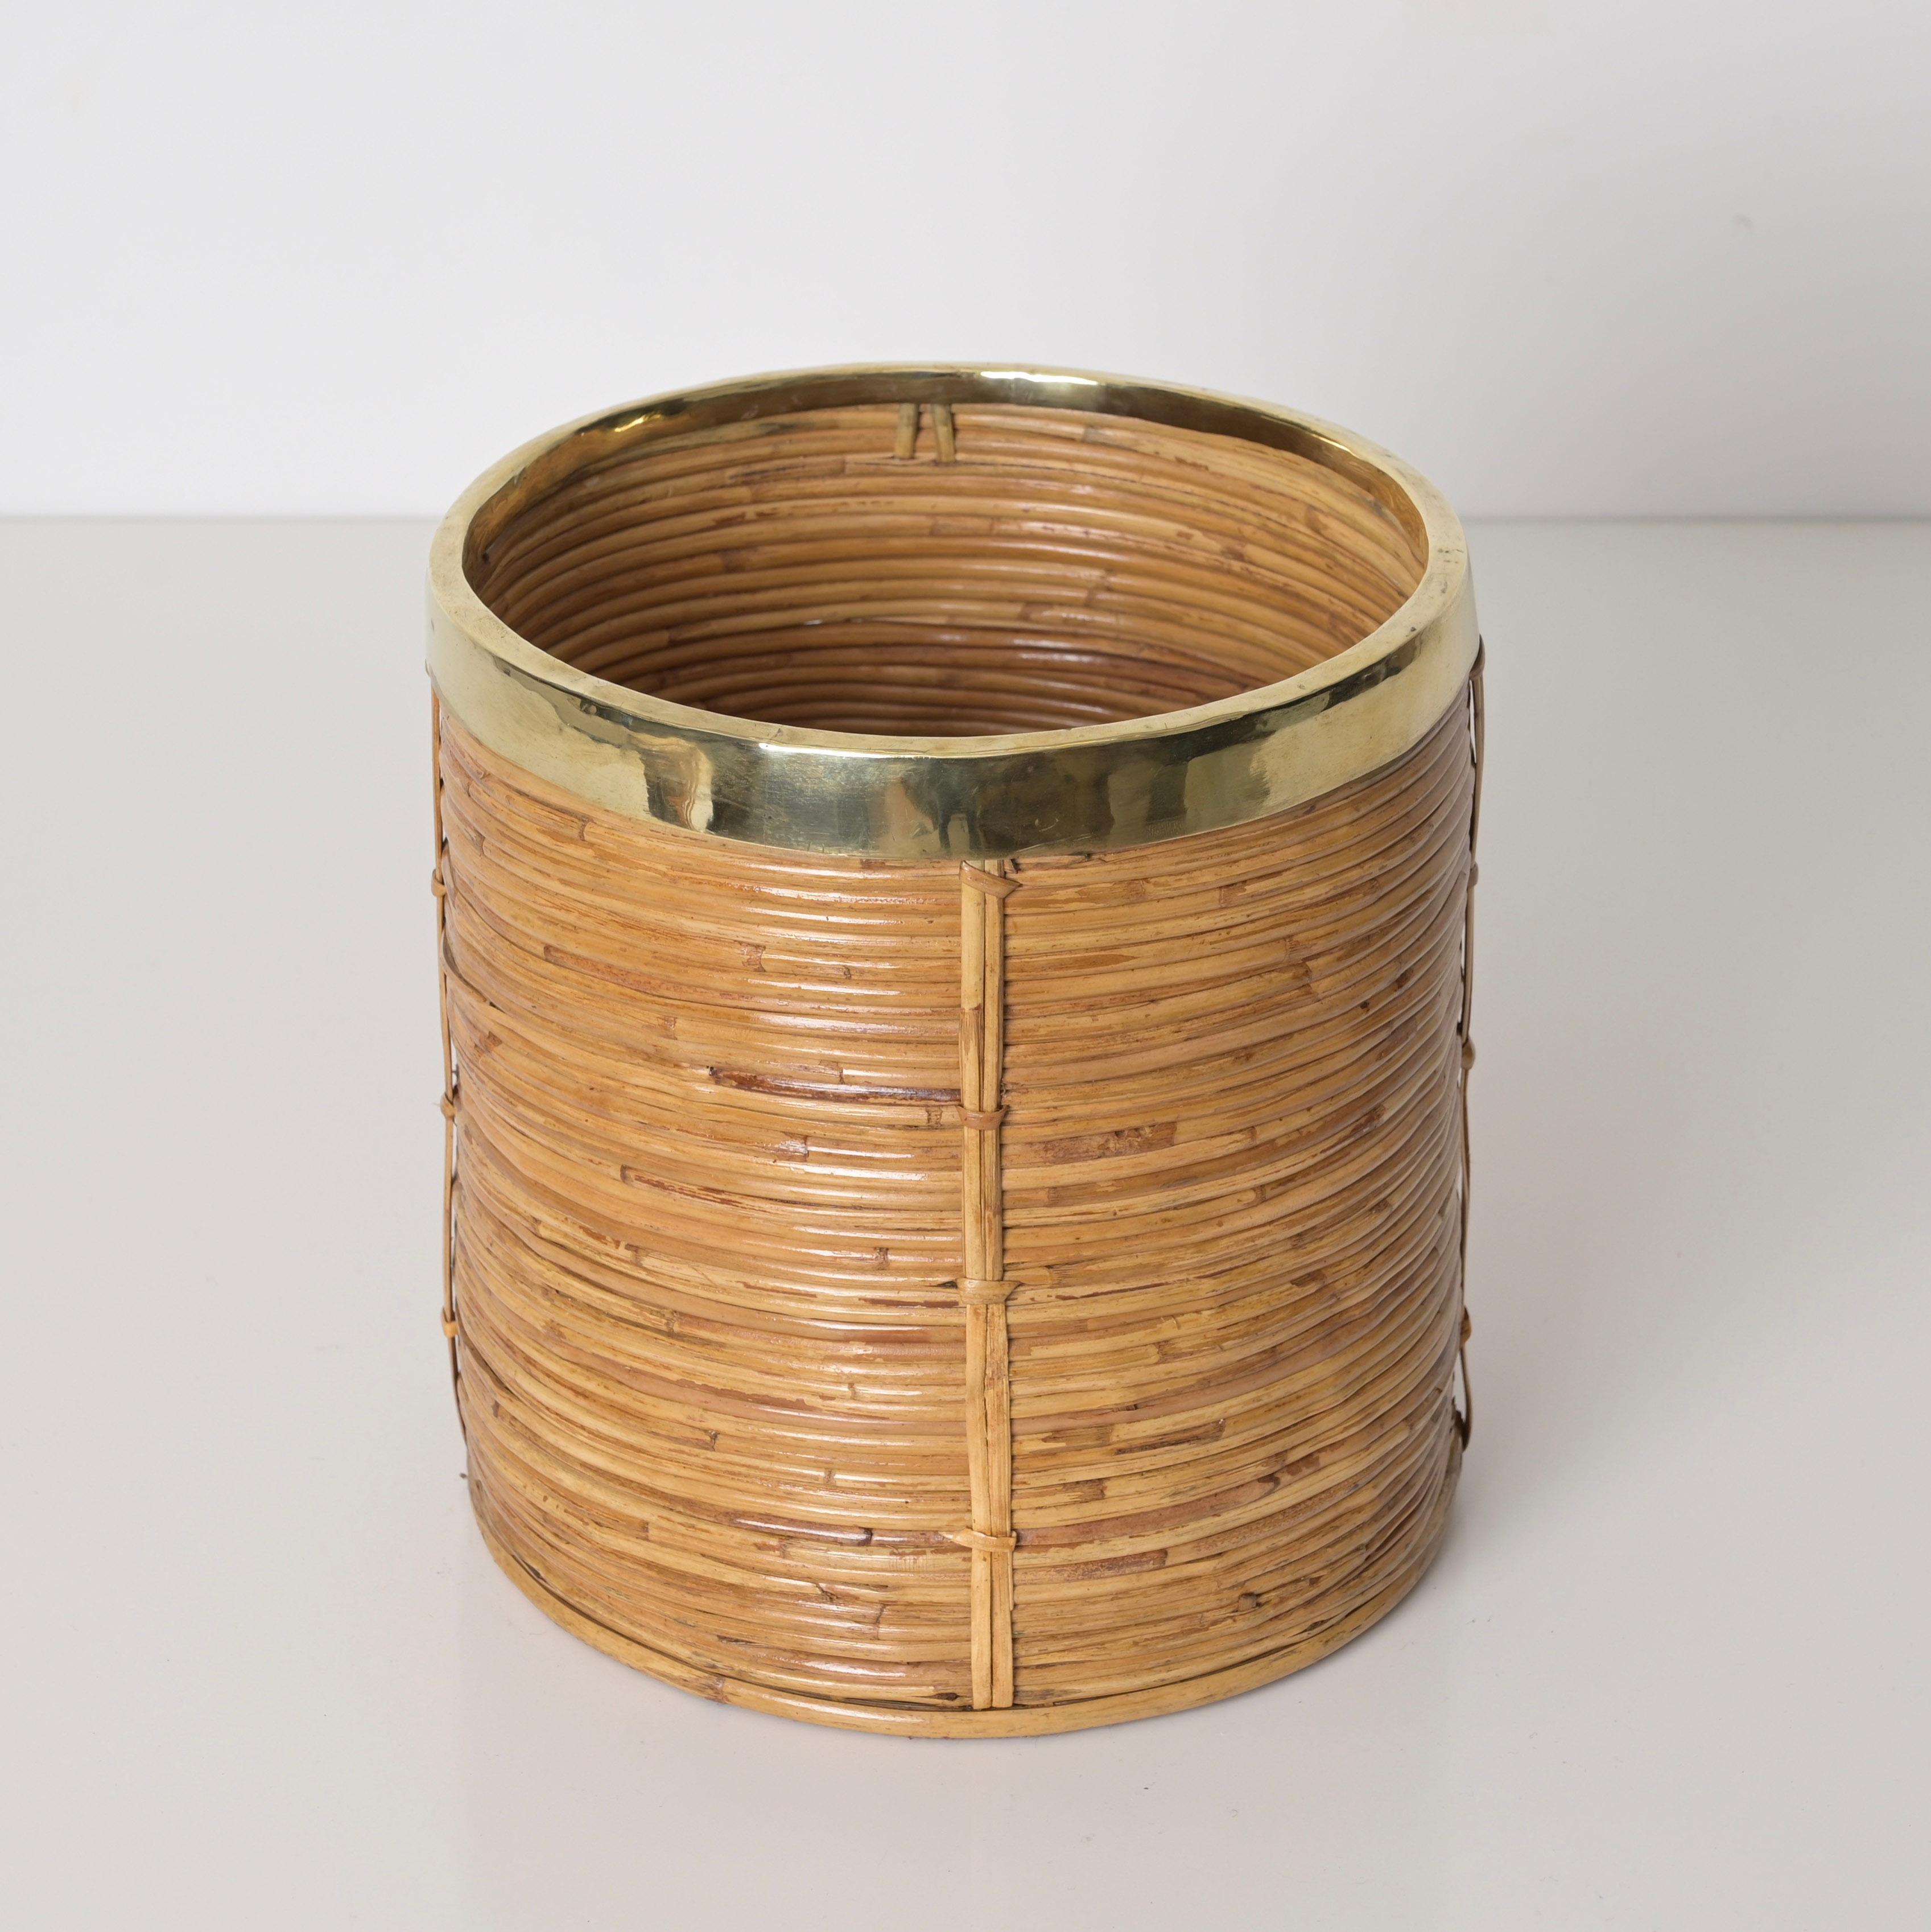 Midcentury Rattan and Brass Planter or Decorative Basket, Italy 1970s For Sale 2